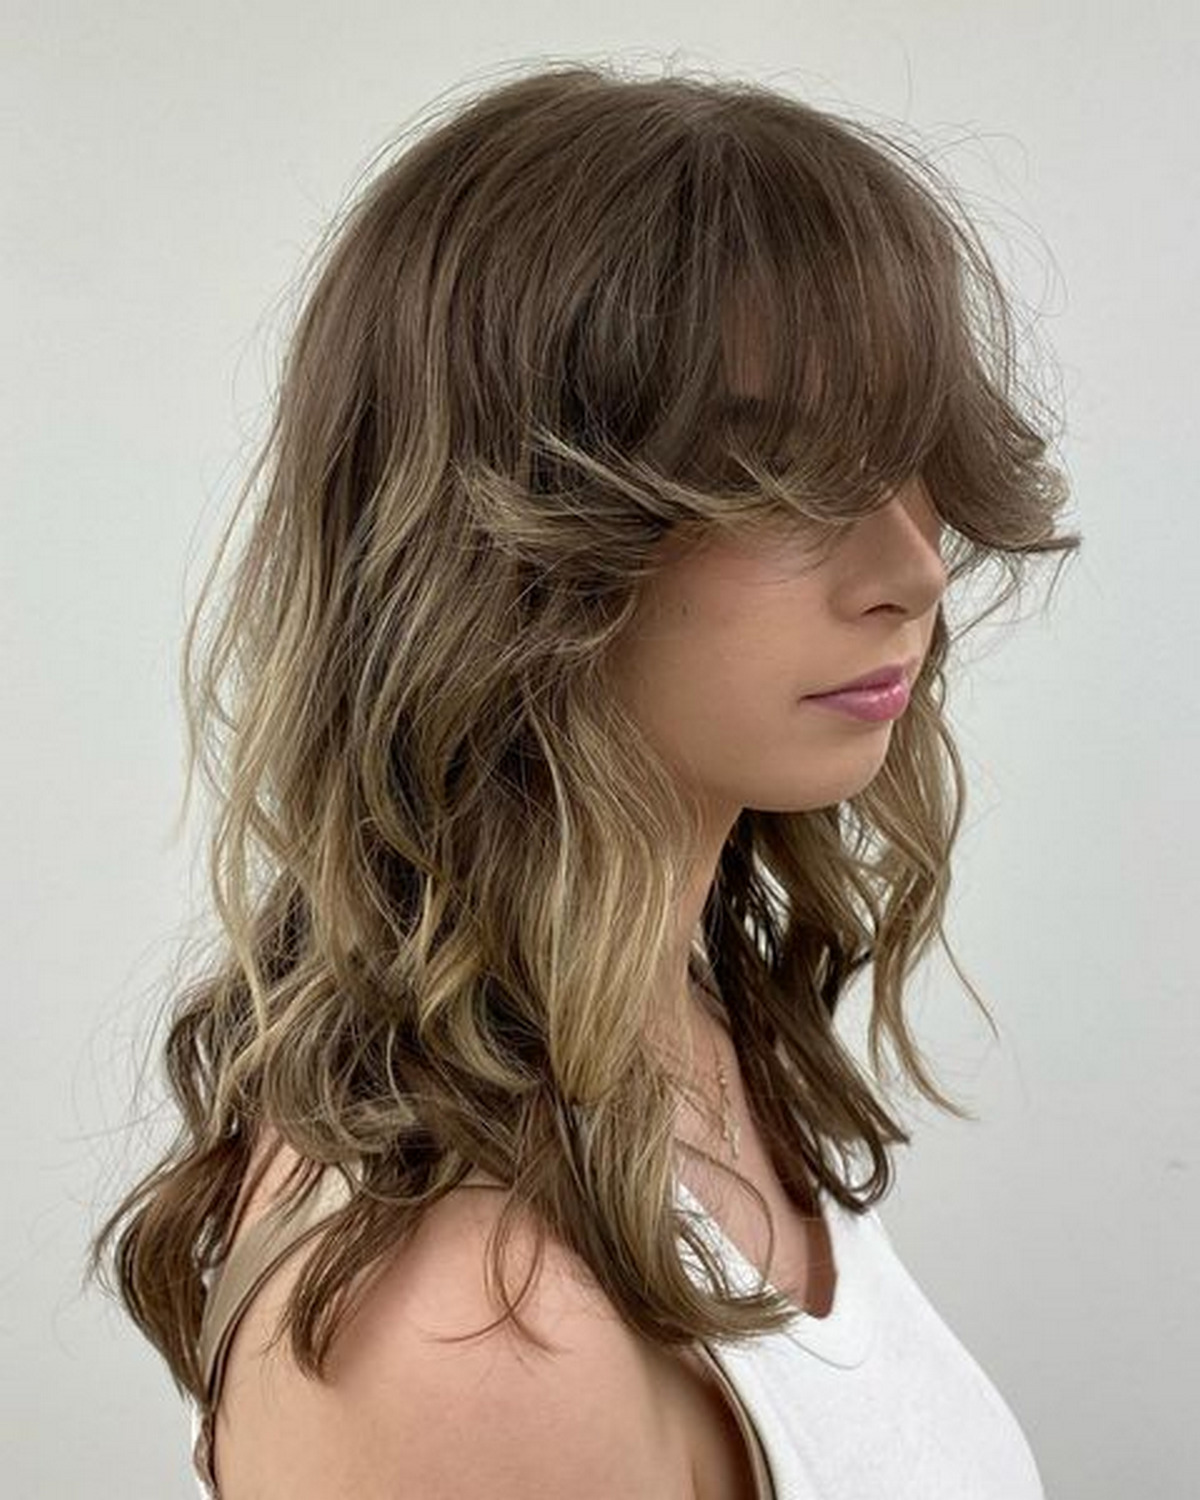 Layers and amazing bangs